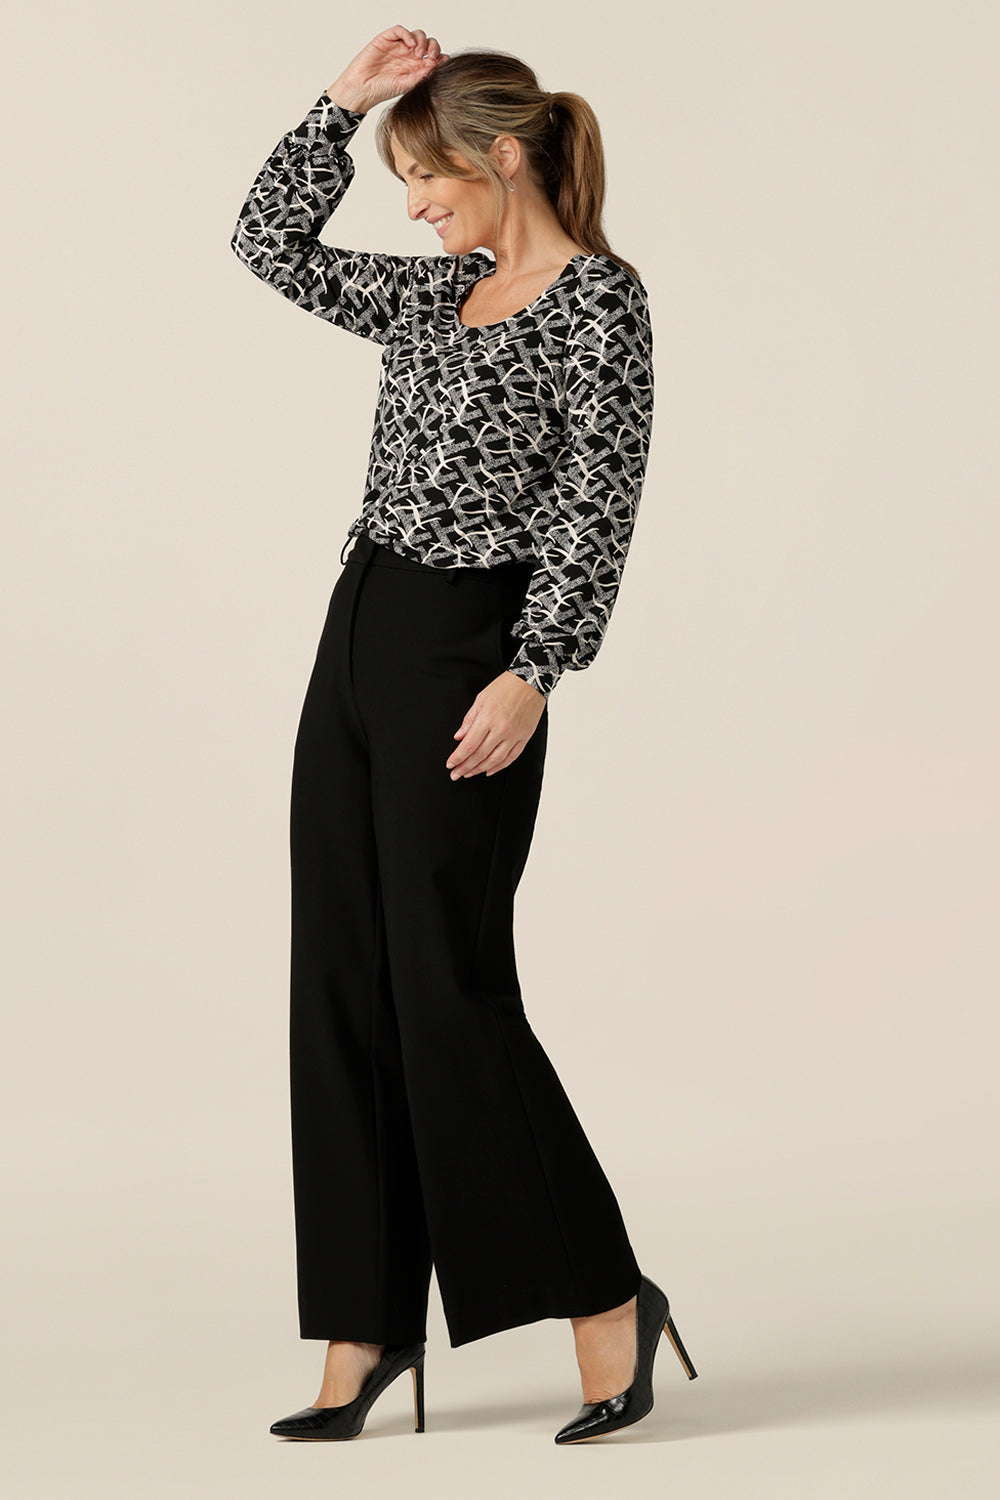 A size 10 woman wears a long sleeve top with bishop sleeve cuffs and a scoop neck in black and white print jersey with tailored, wide leg black workwear trousers. Made in Australia by Australian and New Zealand women's clothing label, L&F this women's work top is available to shop in sizes 8 to 24.